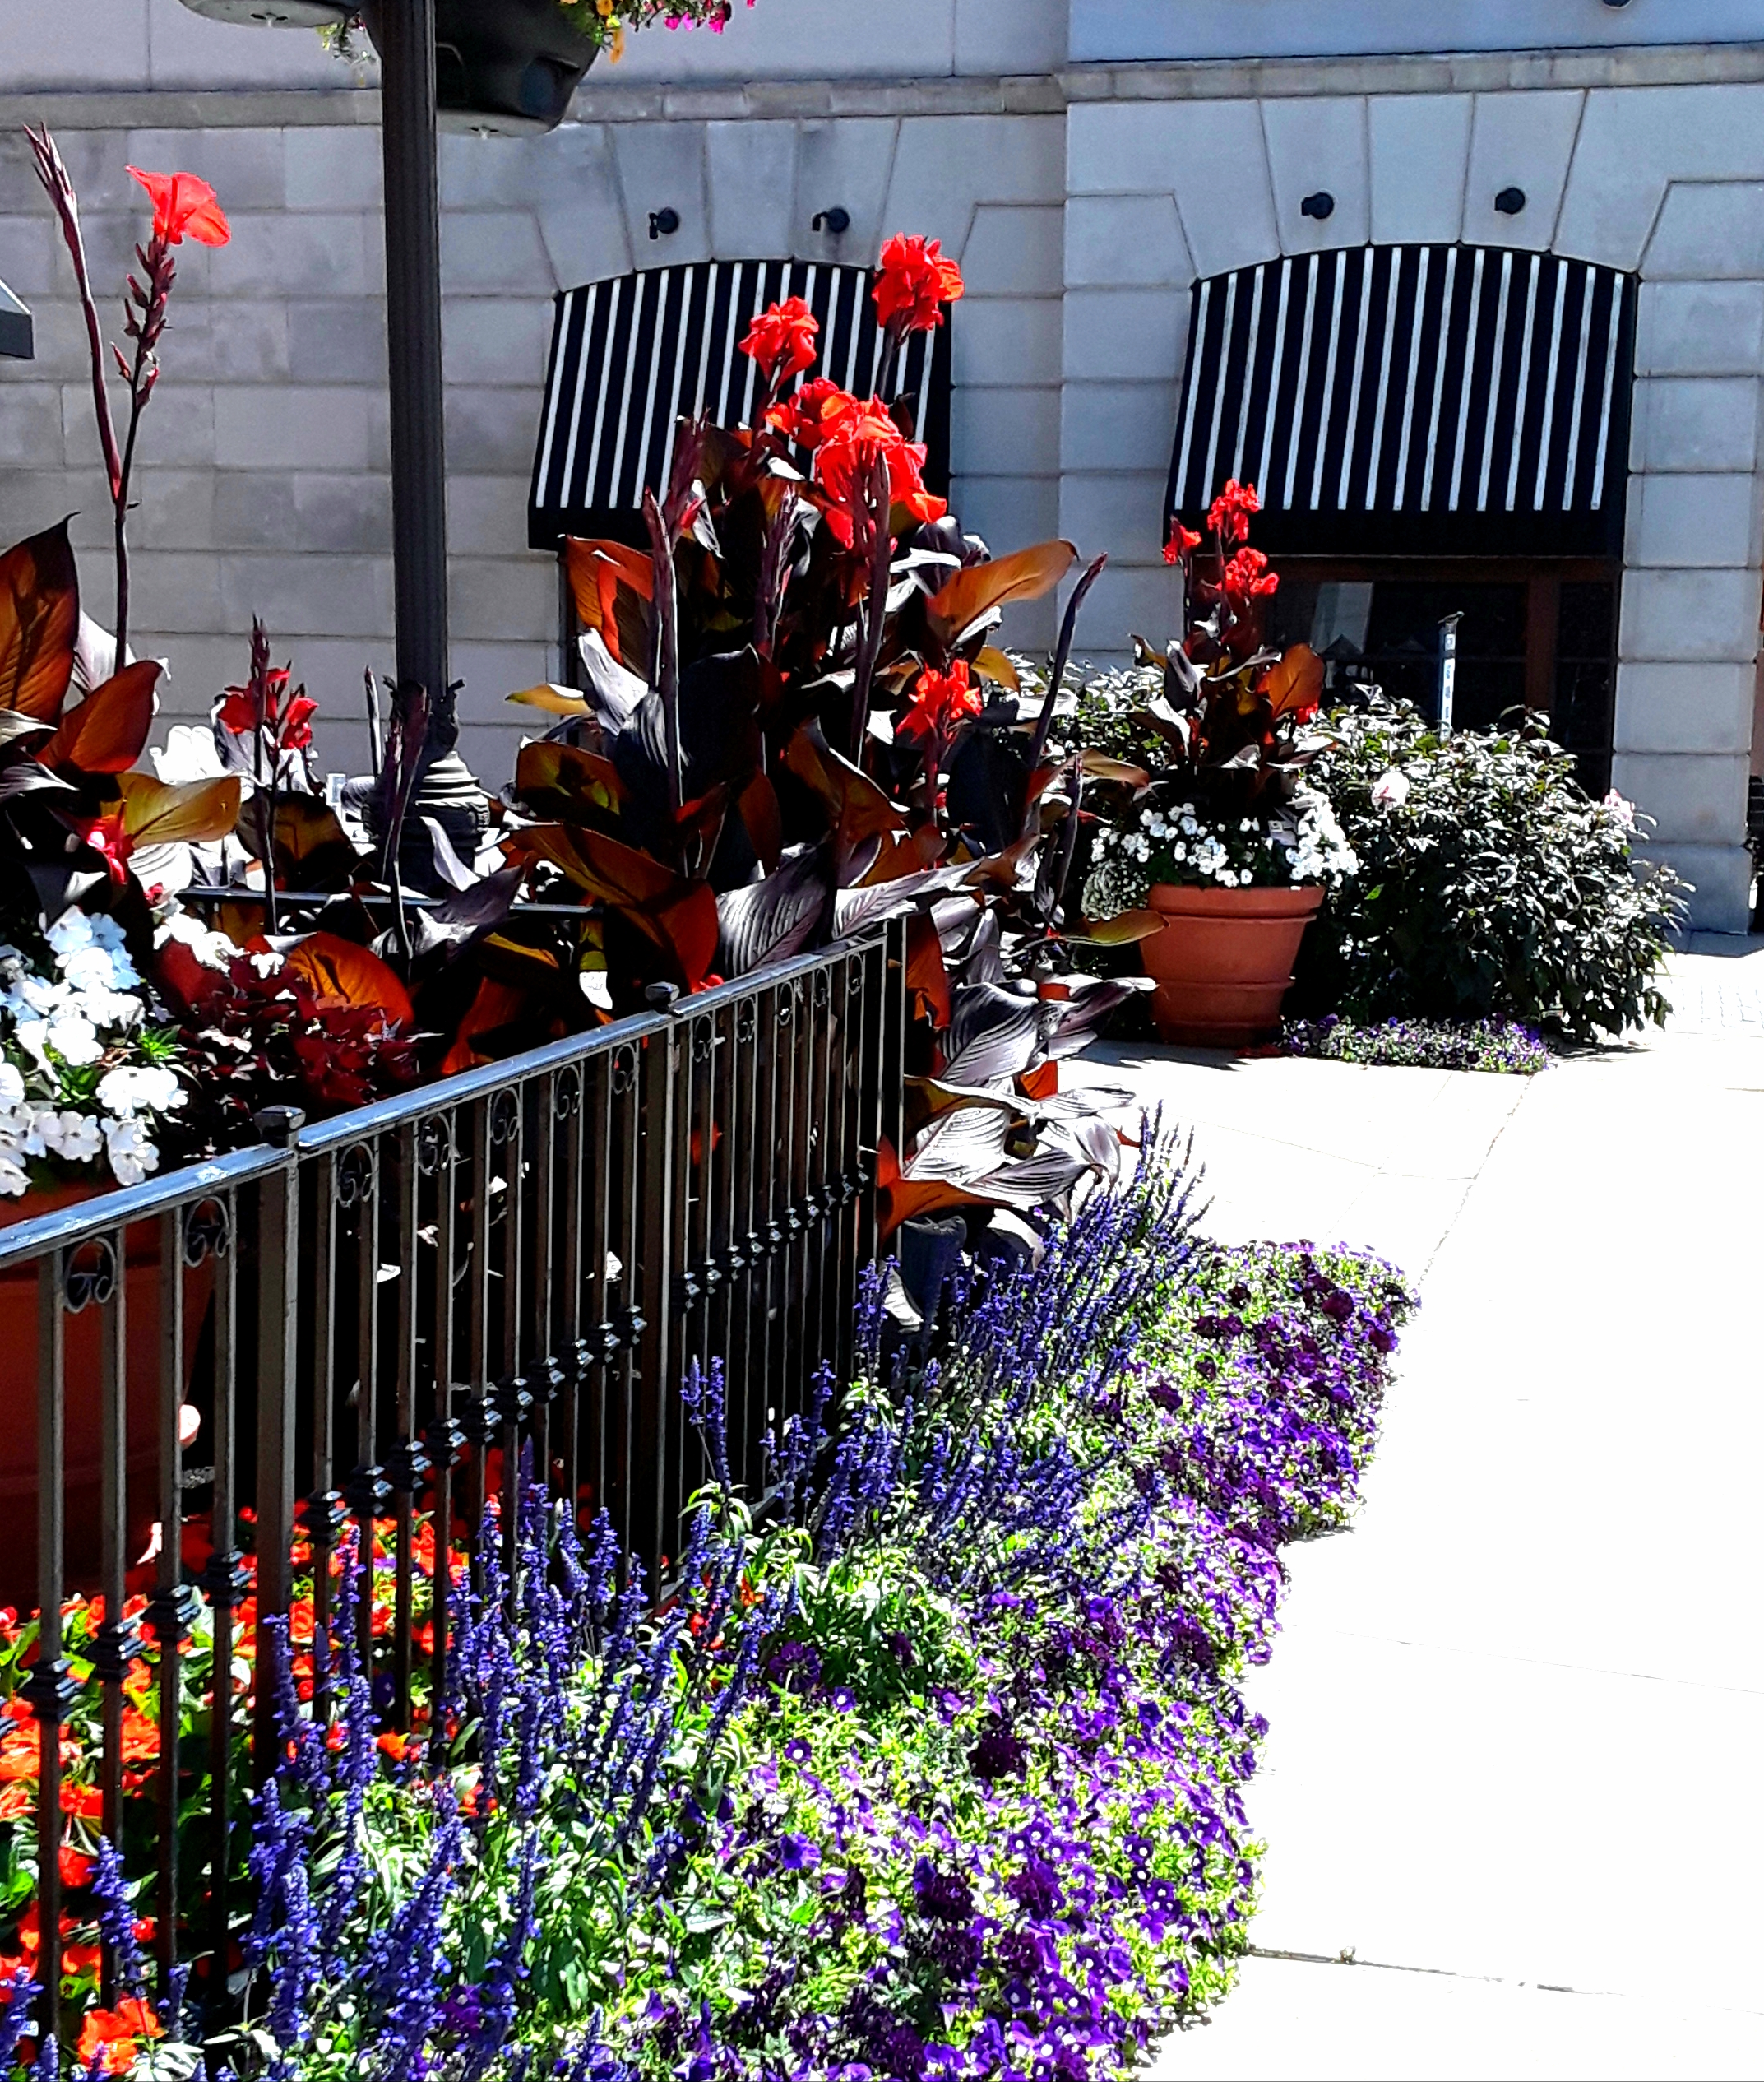 blue salvia, red canna, and black and white striped awnings